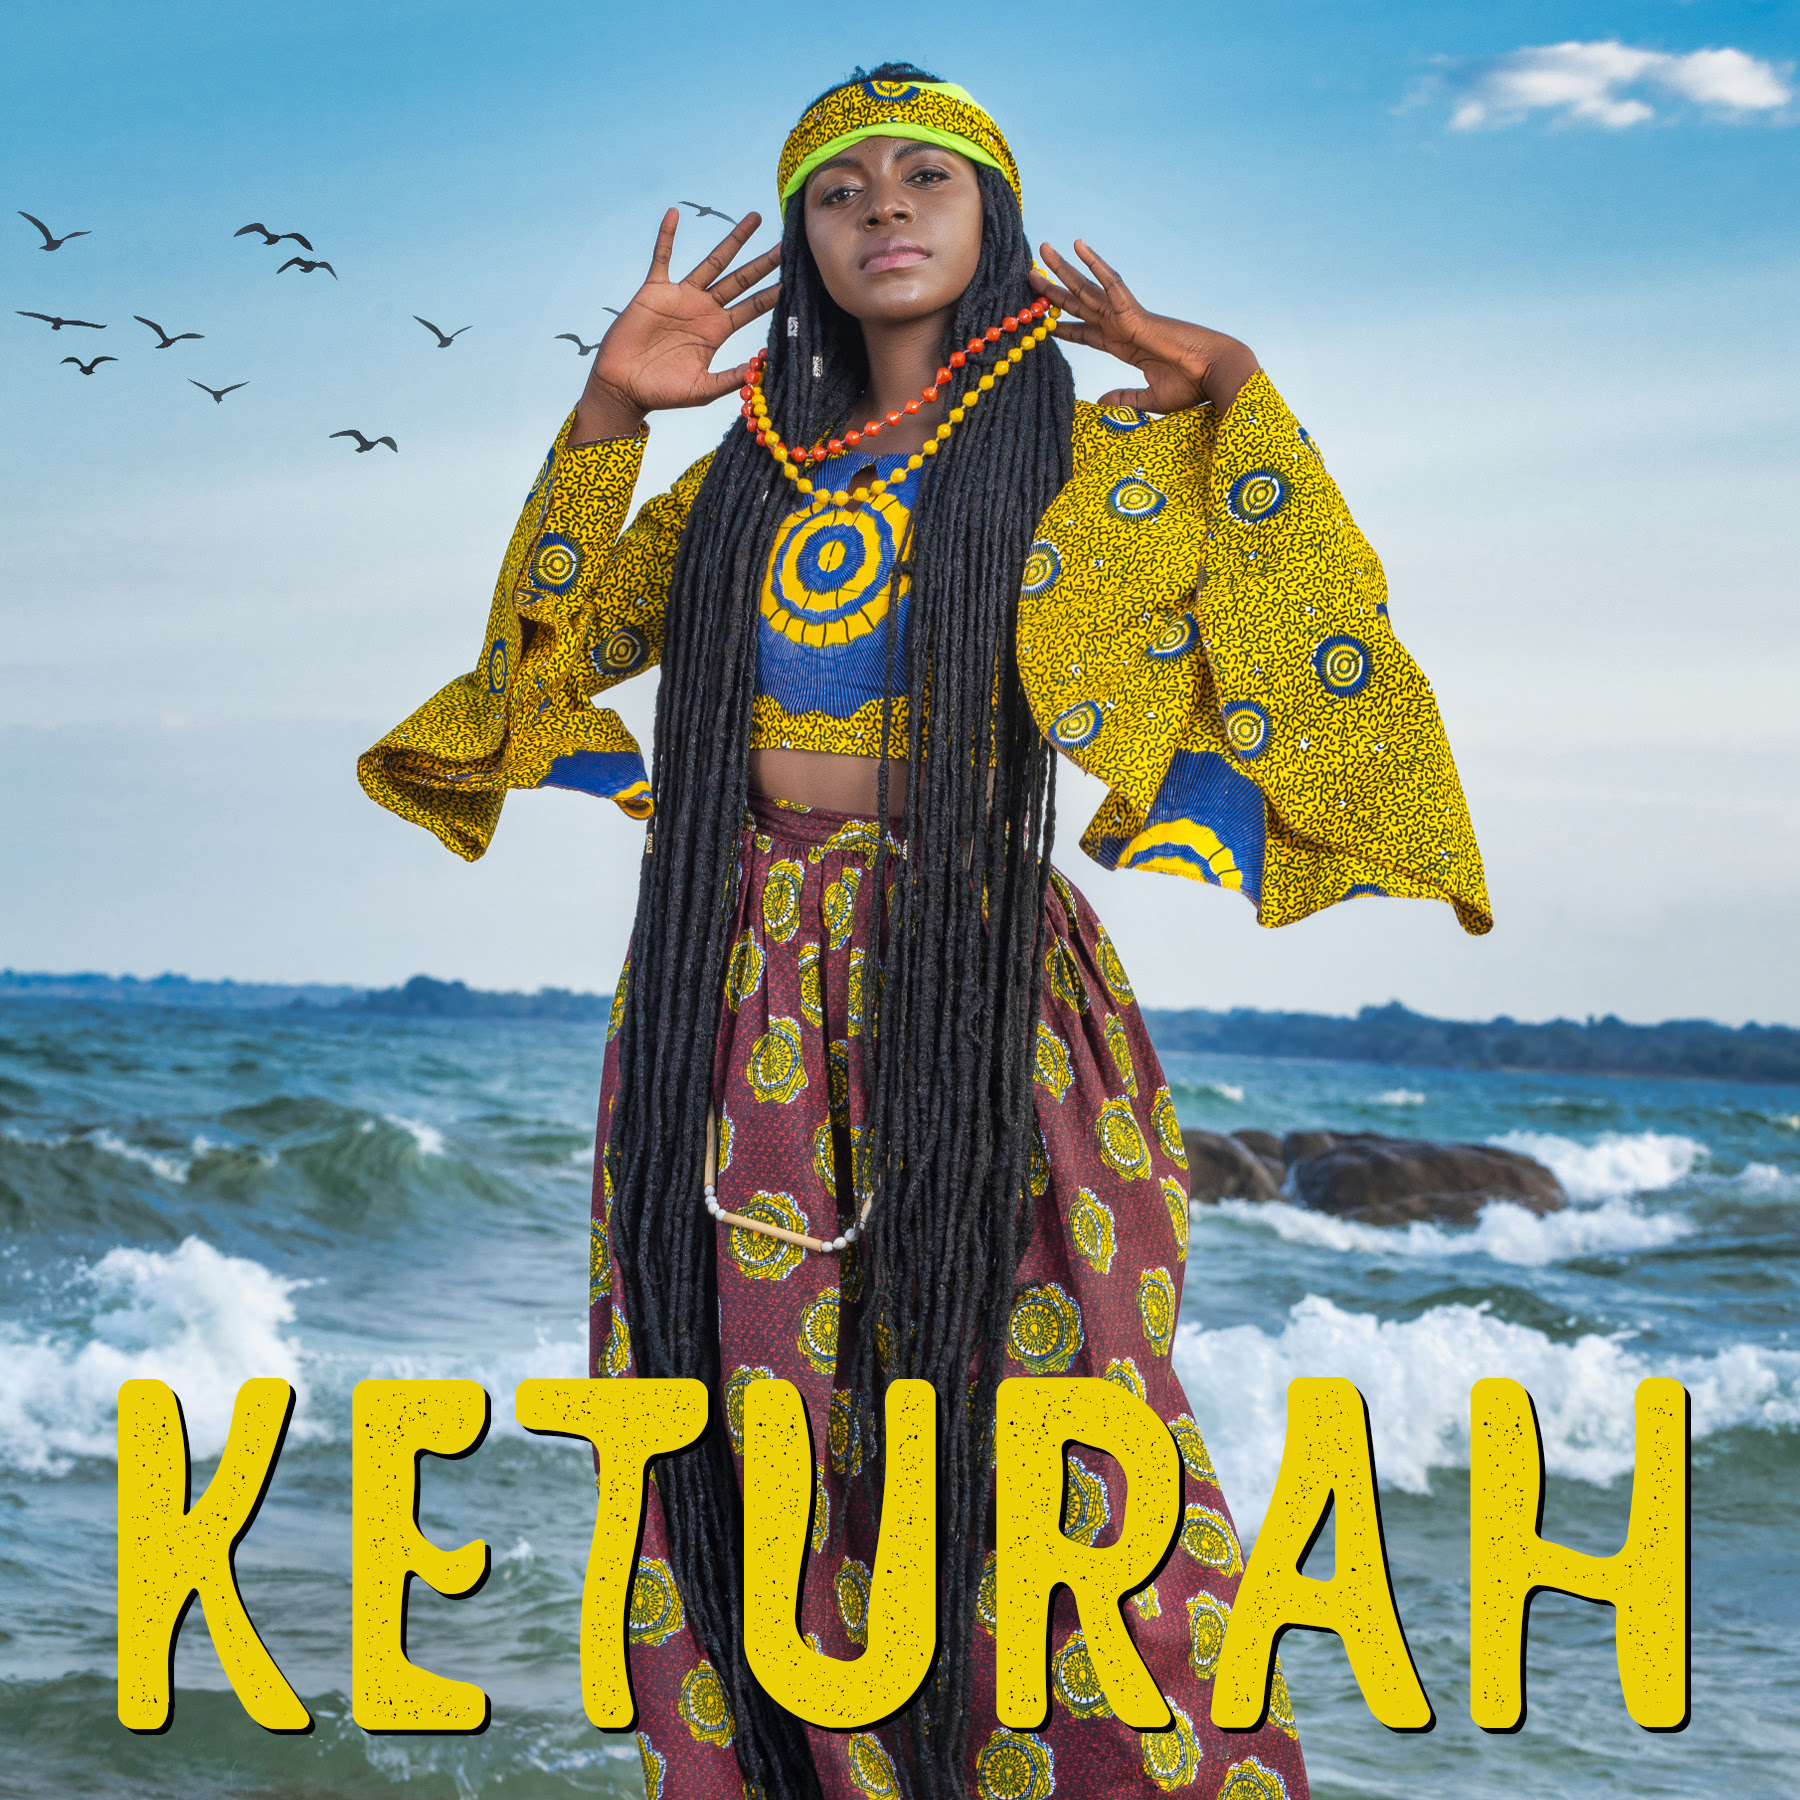 Powerful new voice from Malawi, Keturah announces debut album, first single with Playing for Change